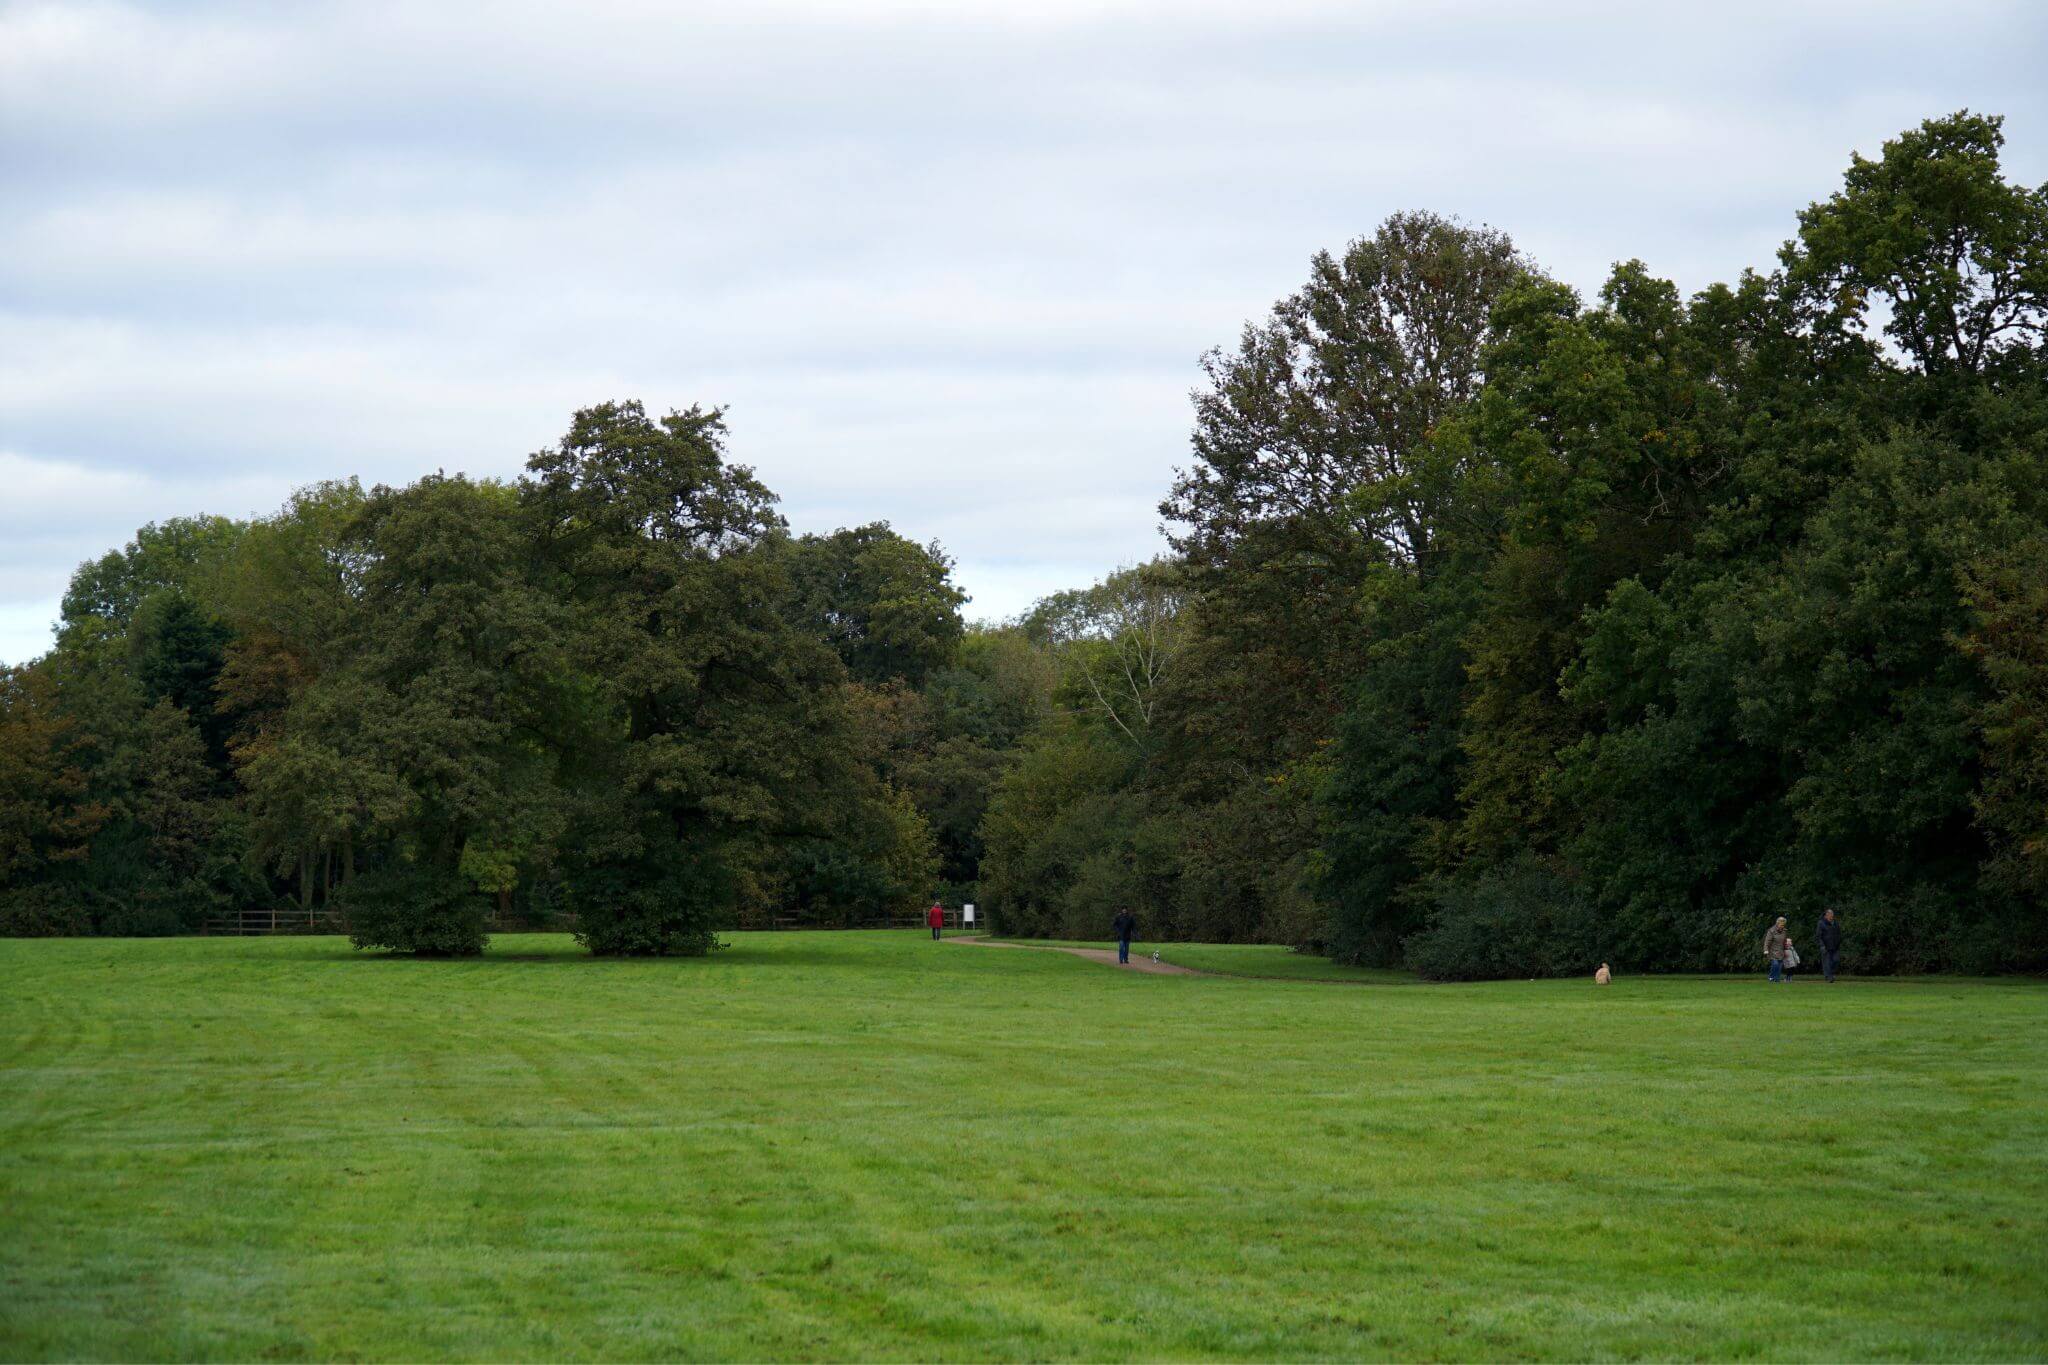 J.R.R Tolkien's former playing field at Shire Country Park